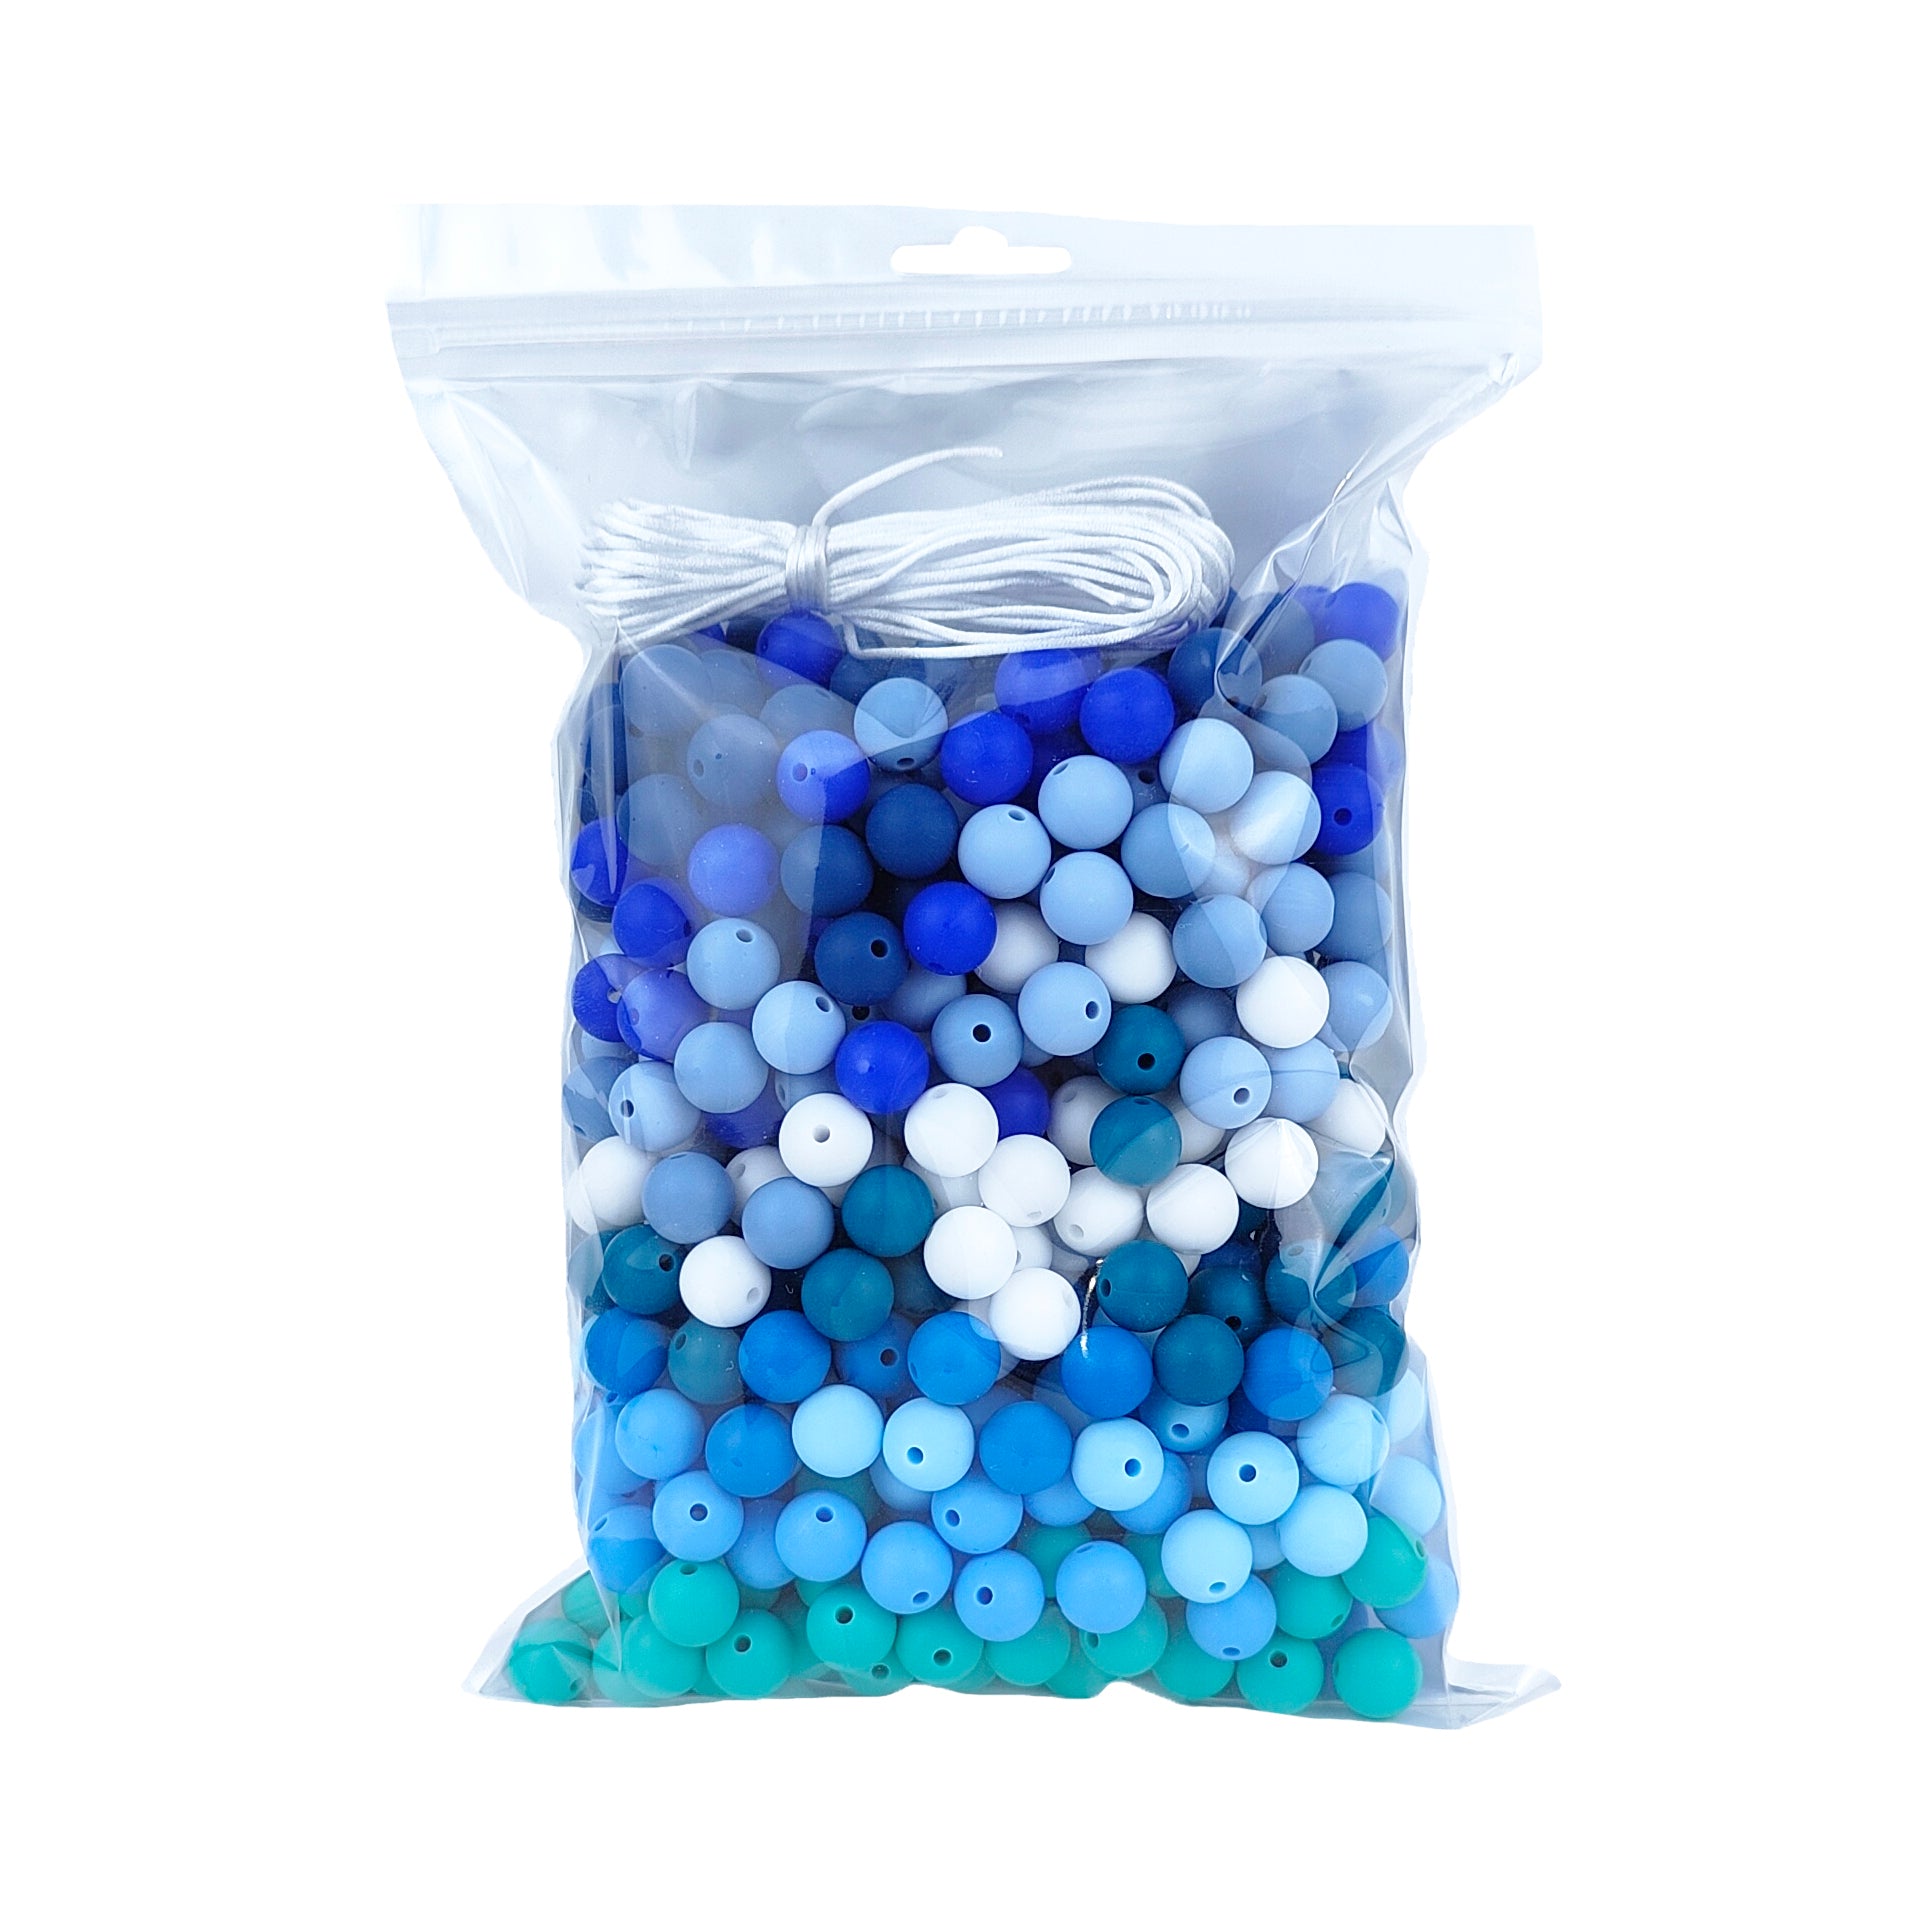 500pcs 12mm Silicone Beads, 25 Mixed Silicone Beads Bulk Round Silicone  Beads for Keychain Making Kit Rubber Silicone Beads Silicone Focal Beads  Loose